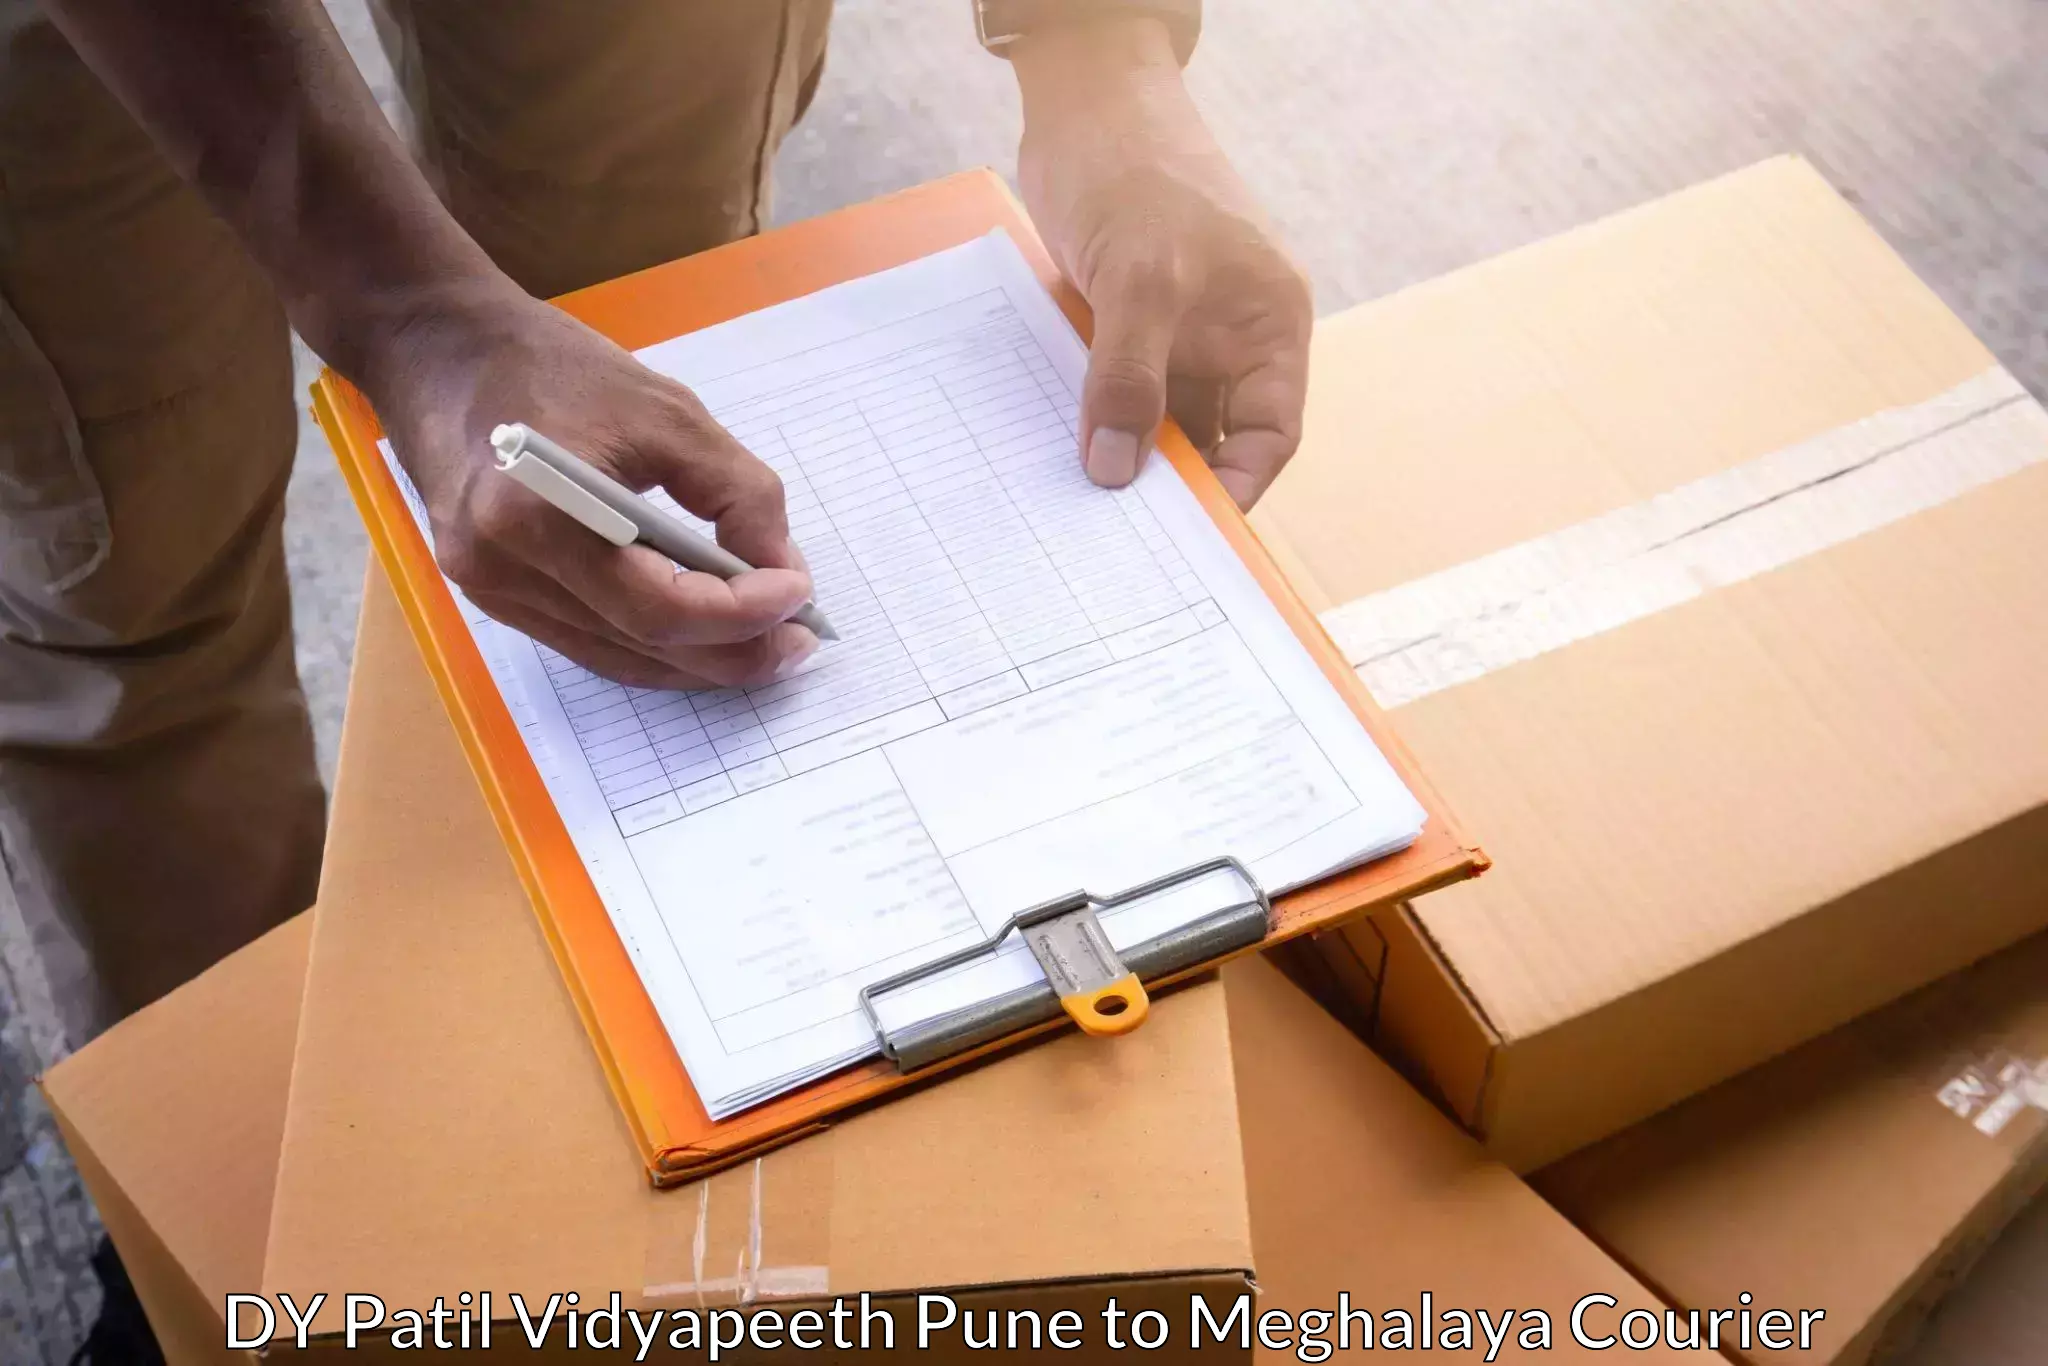 High-priority parcel service DY Patil Vidyapeeth Pune to Shillong